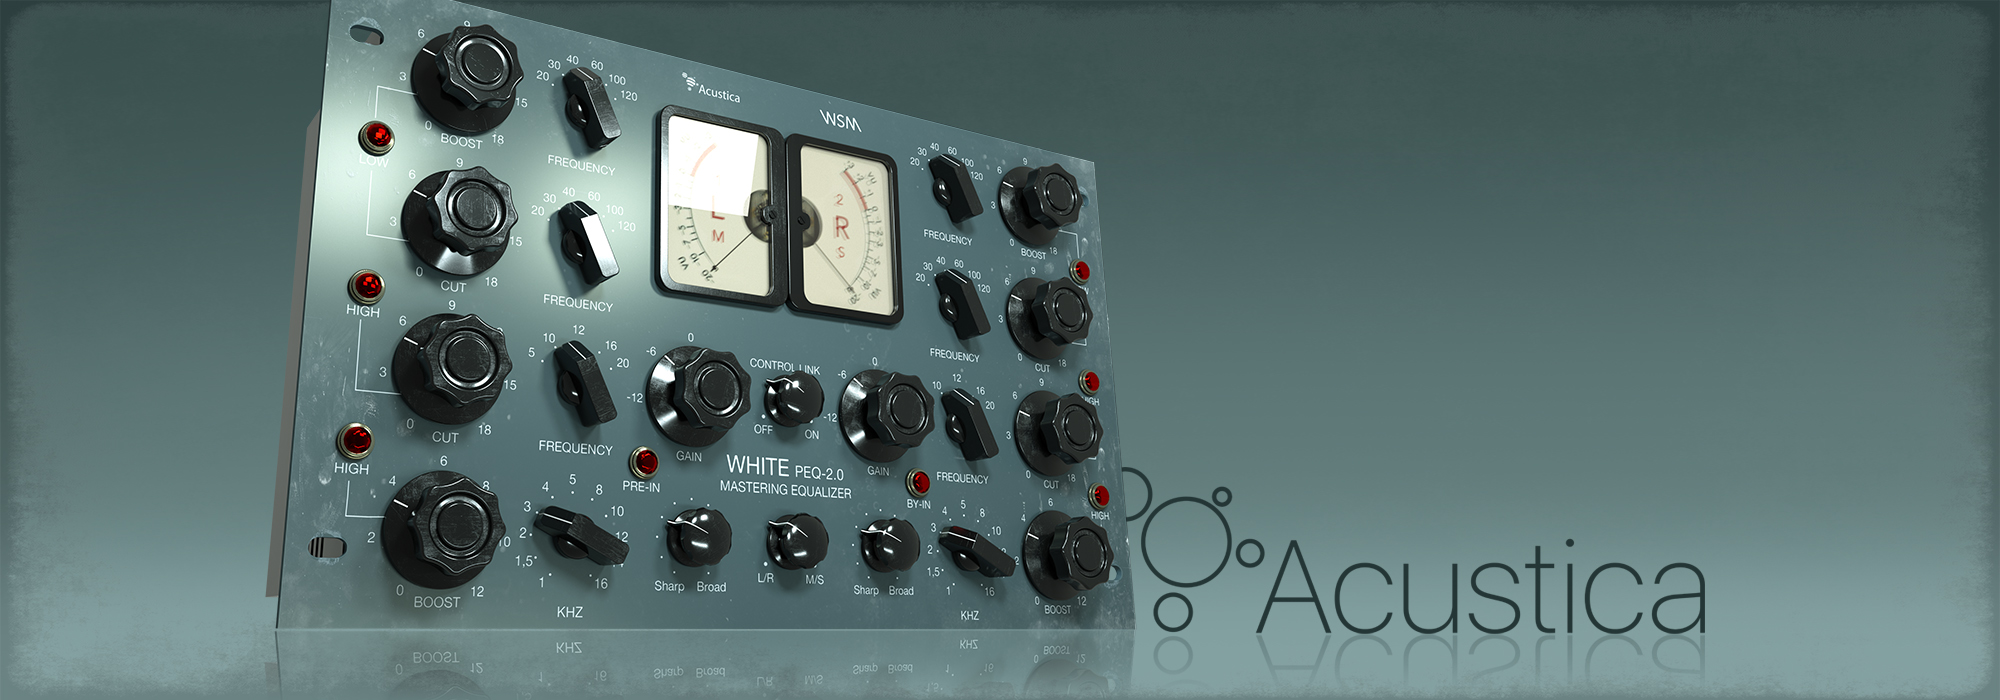 Is White The New Black – Jack Ruston’s Thoughts On Acustica’s New Flagship Plugin